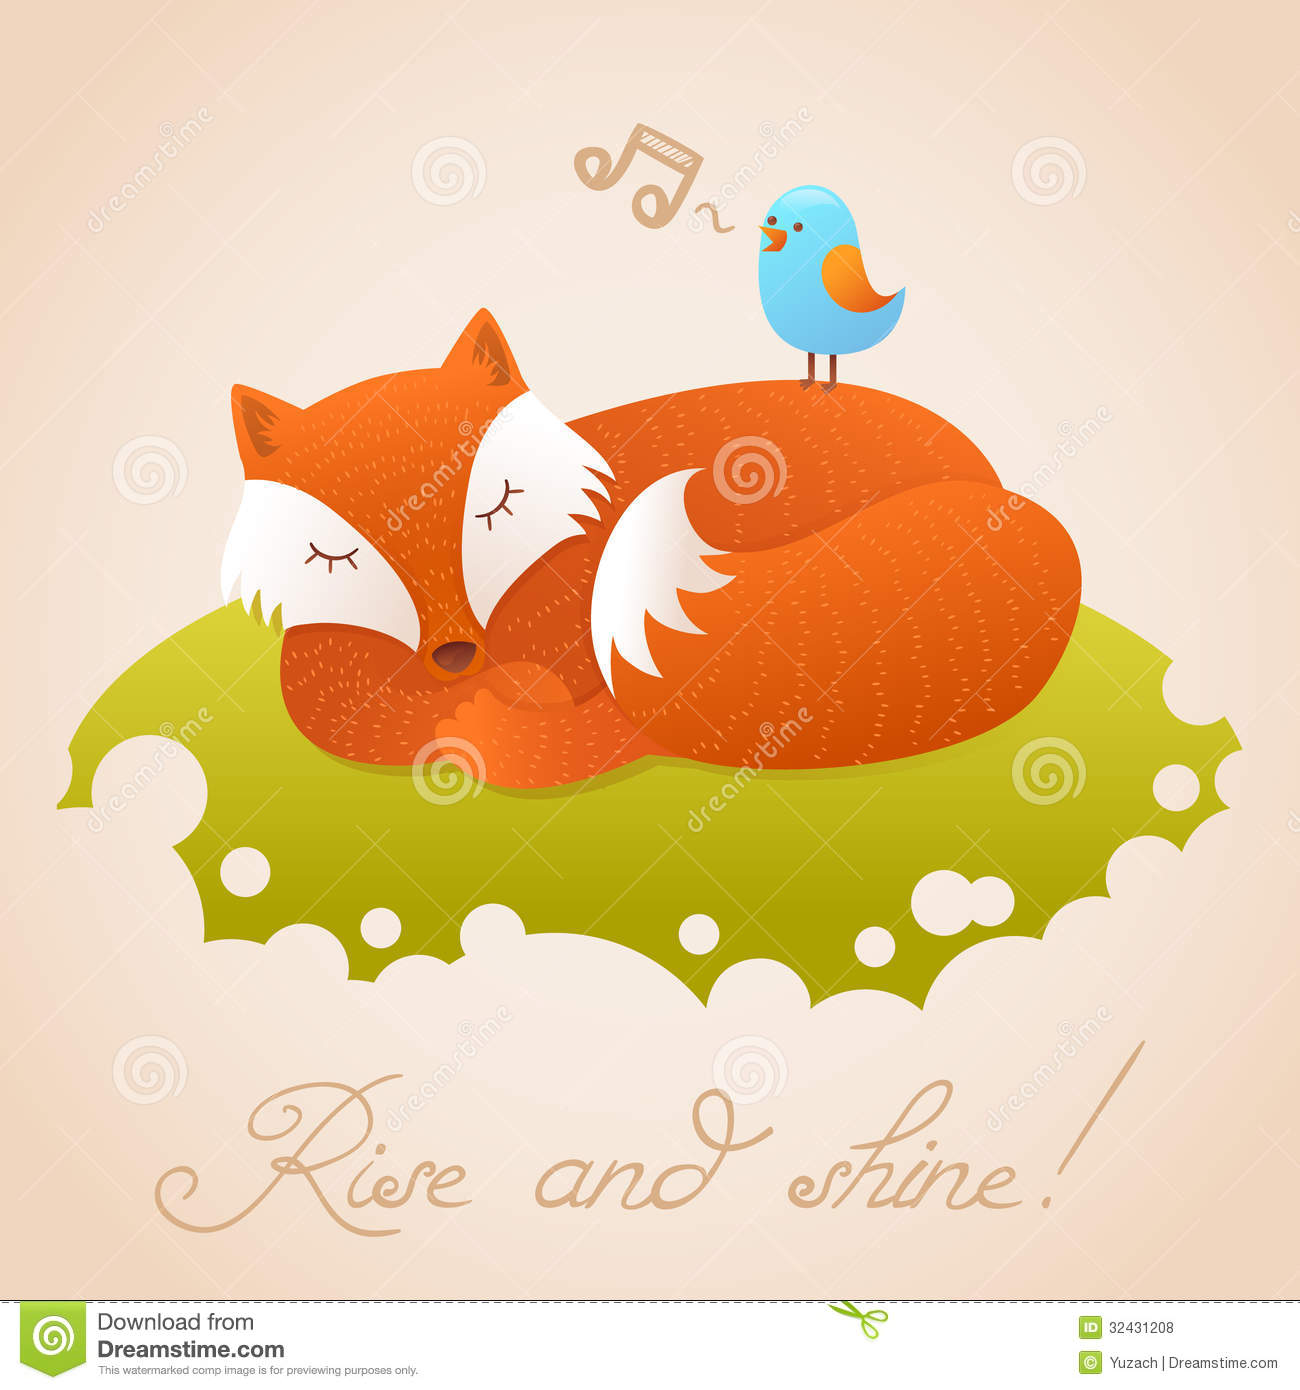 Cute Baby Card With Sleeping Red Fox Royalty Free Stock Photos   Image